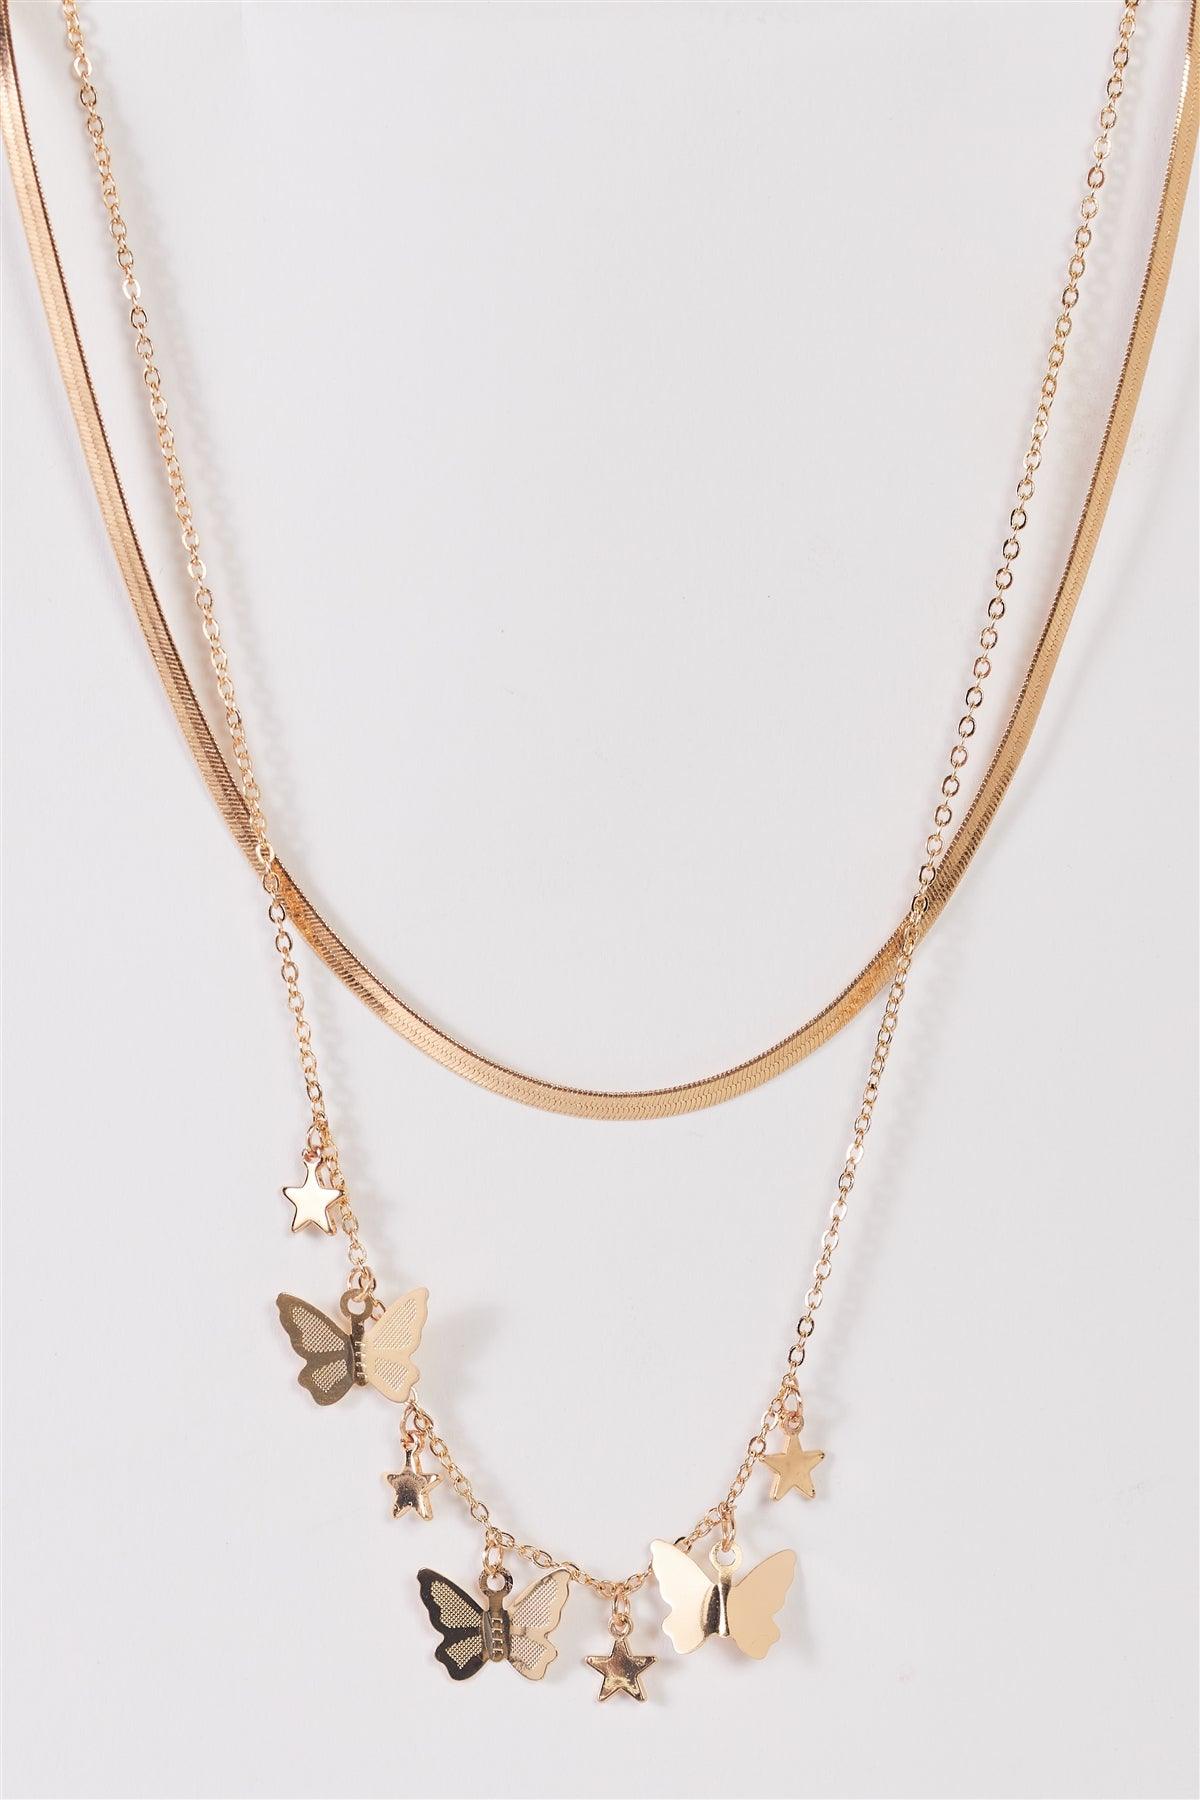 Gold Flat Snake & Link Chain With 3D Butterflies And Stars Charms Set Necklace /3 Pieces